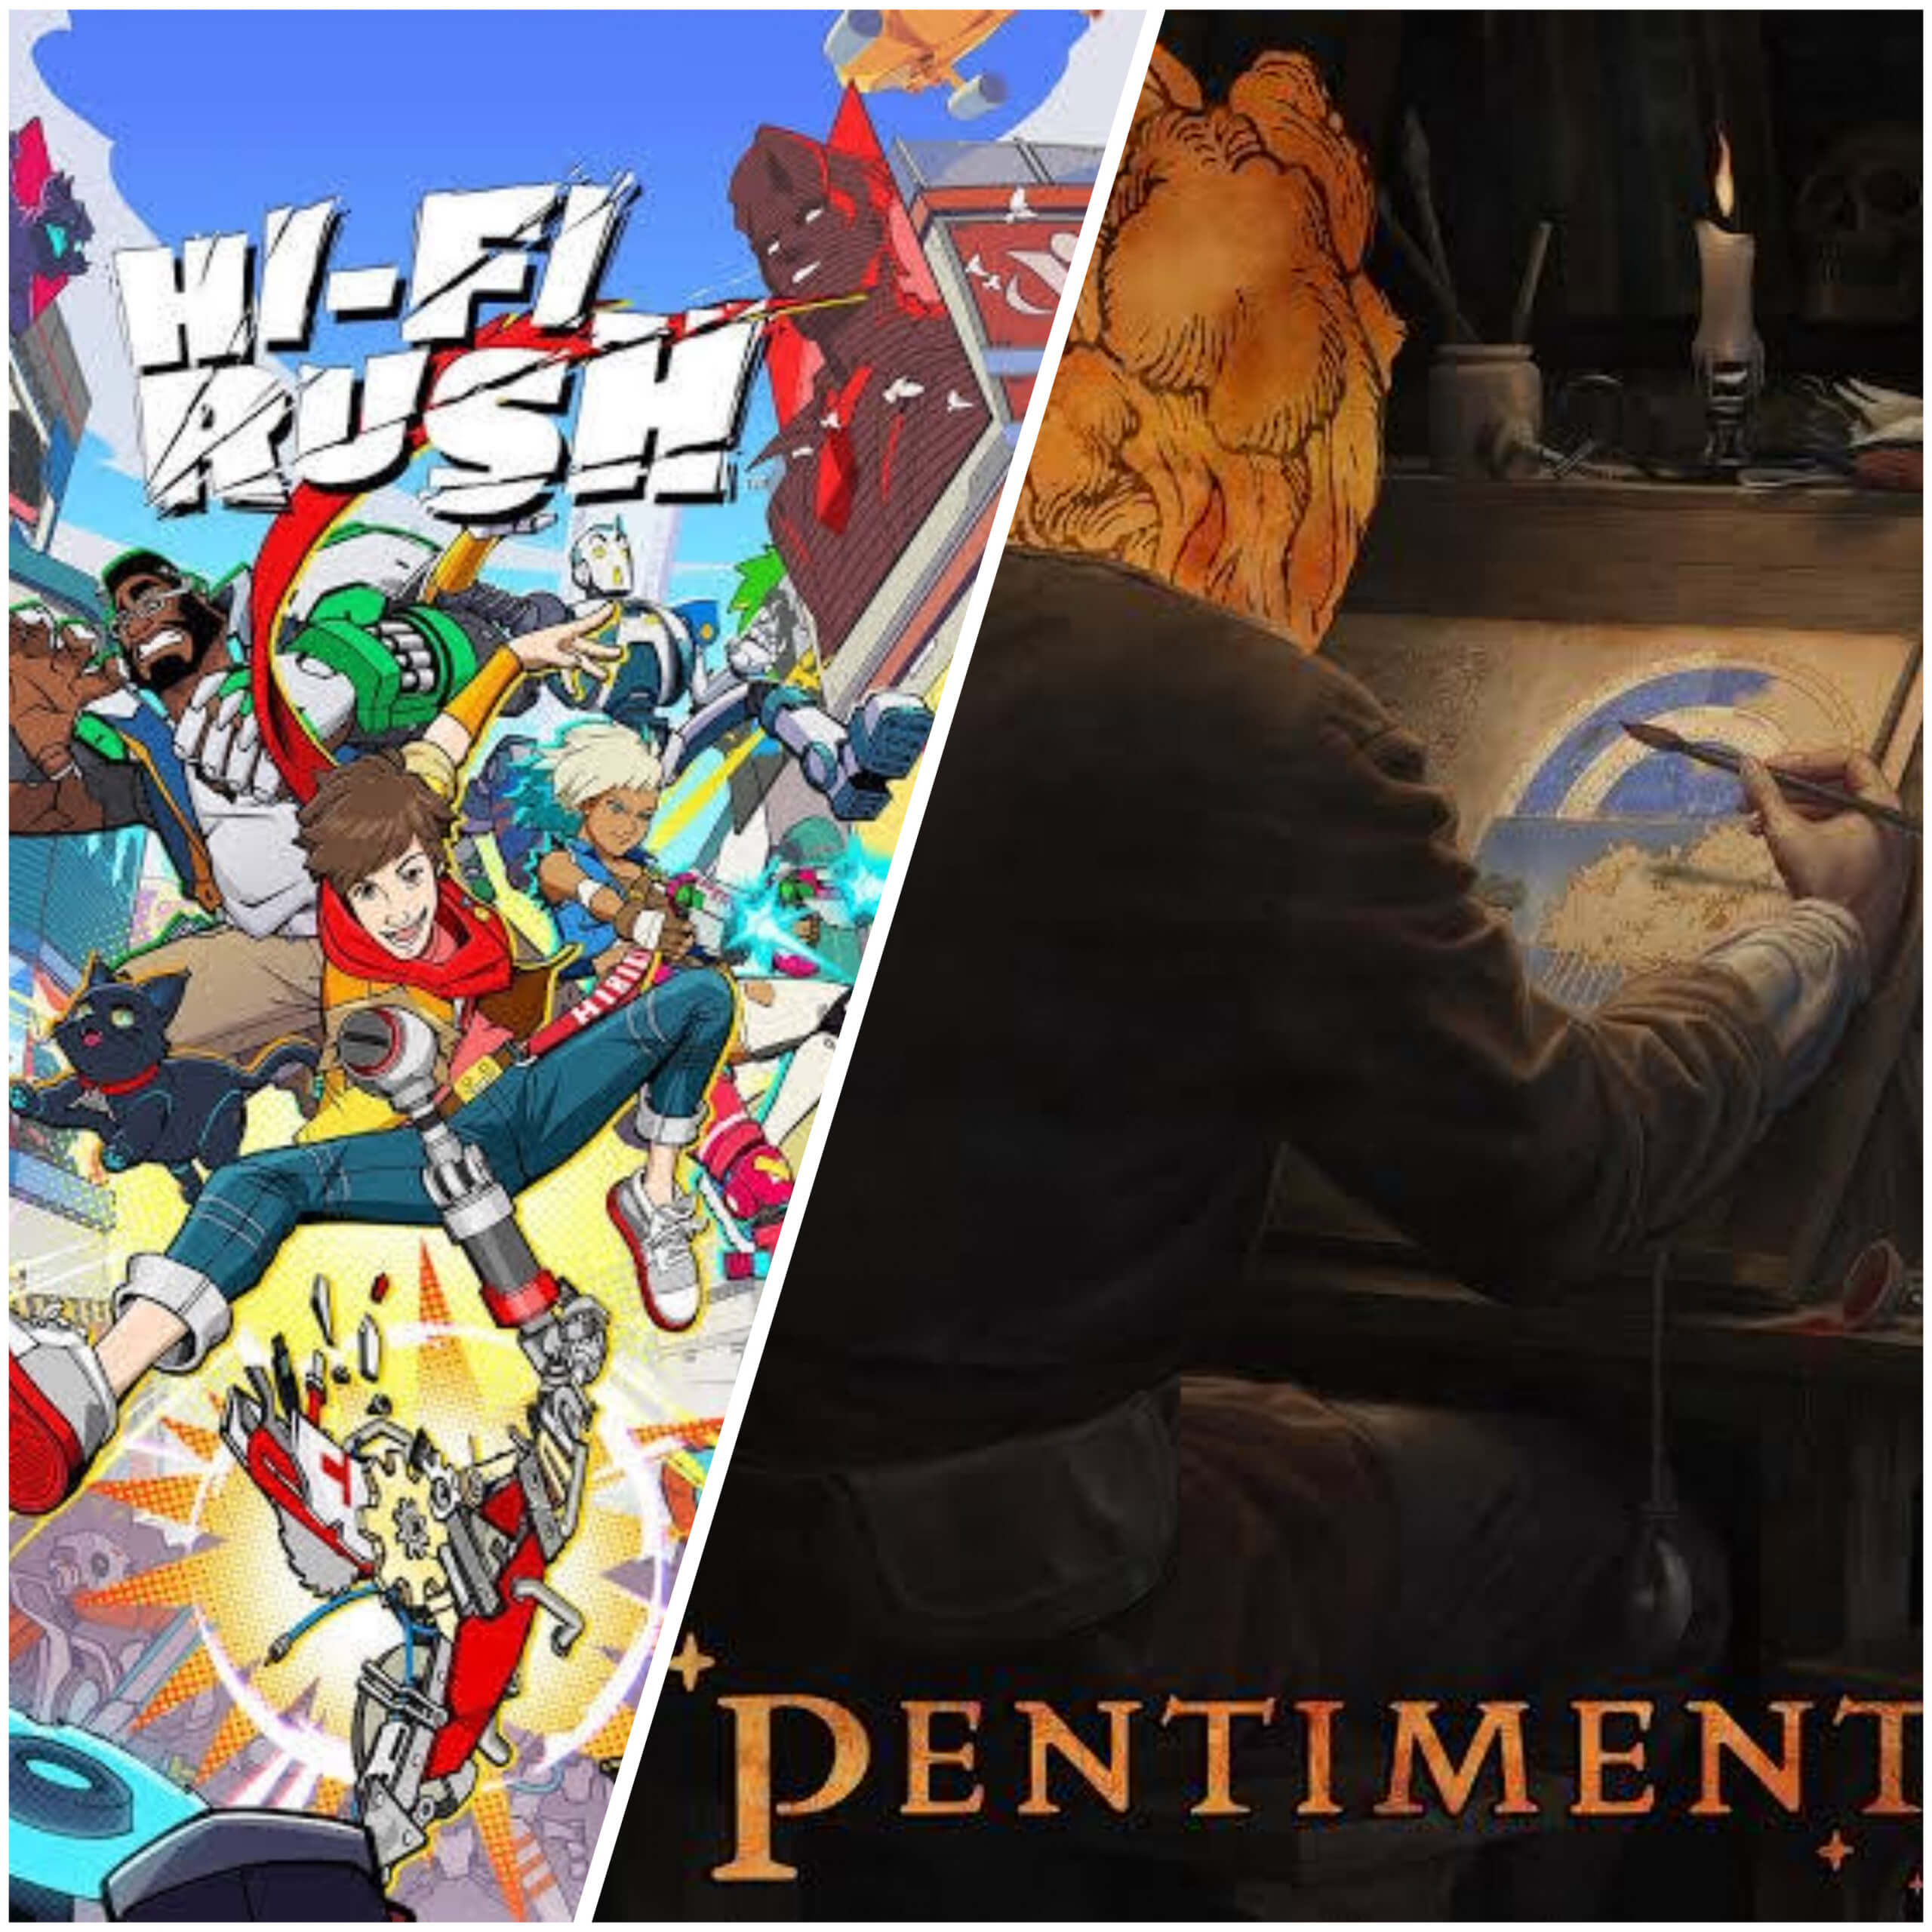 The cover arts for hi-fi rush and pentiment. Both showing their titles and characters in the games.